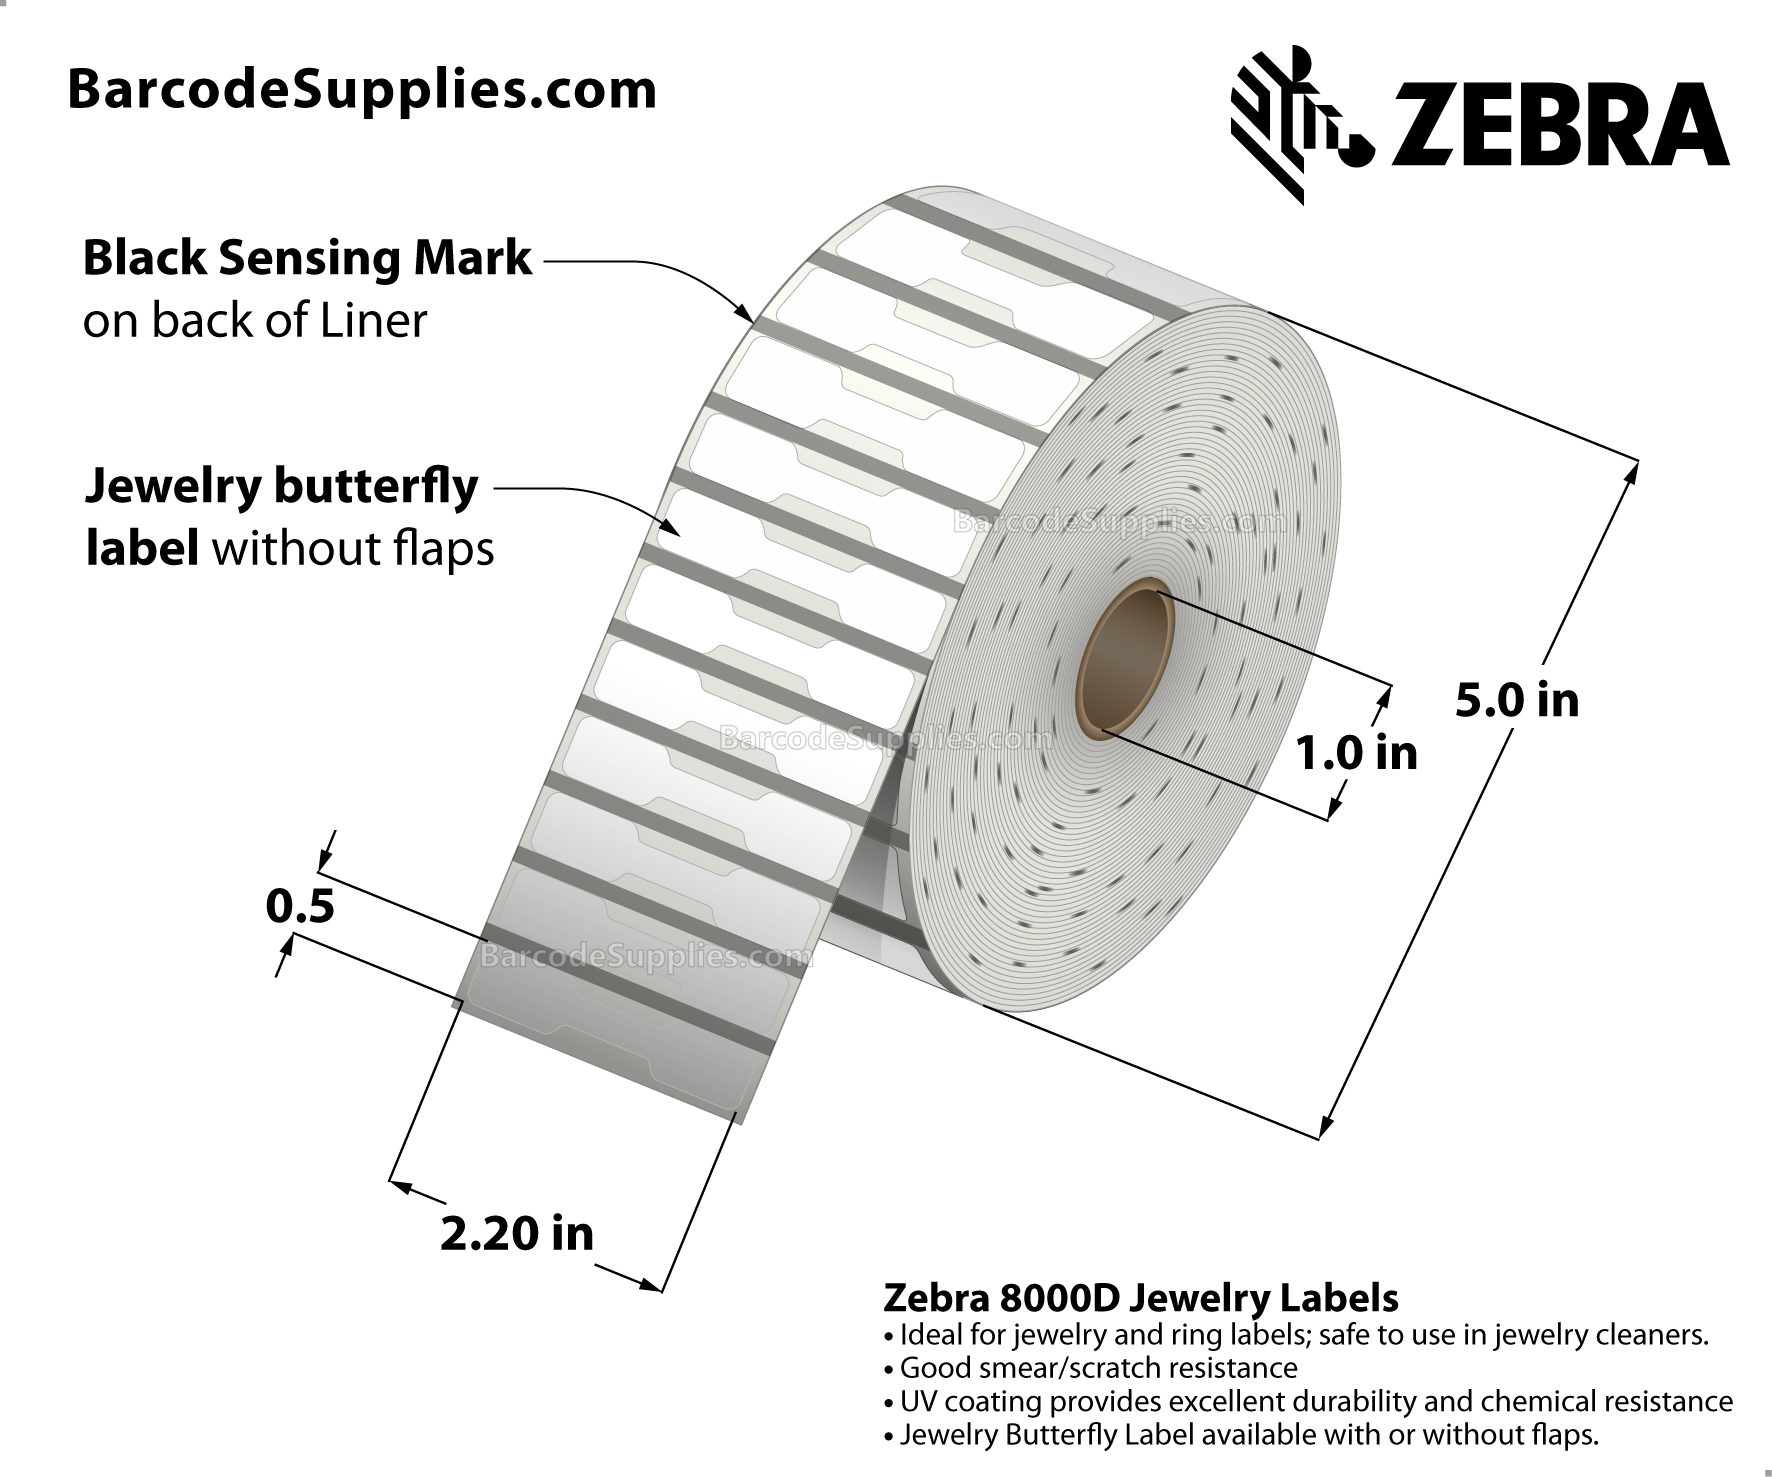 2.2 x 0.5 Direct Thermal White 8000D Jewelry (Jewelry Butterfly Label w/o flaps) Labels With Permanent Adhesive - Black mark sensing - Not Perforated - 3510 Labels Per Roll - Carton Of 6 Rolls - 21060 Labels Total - MPN: 10010064